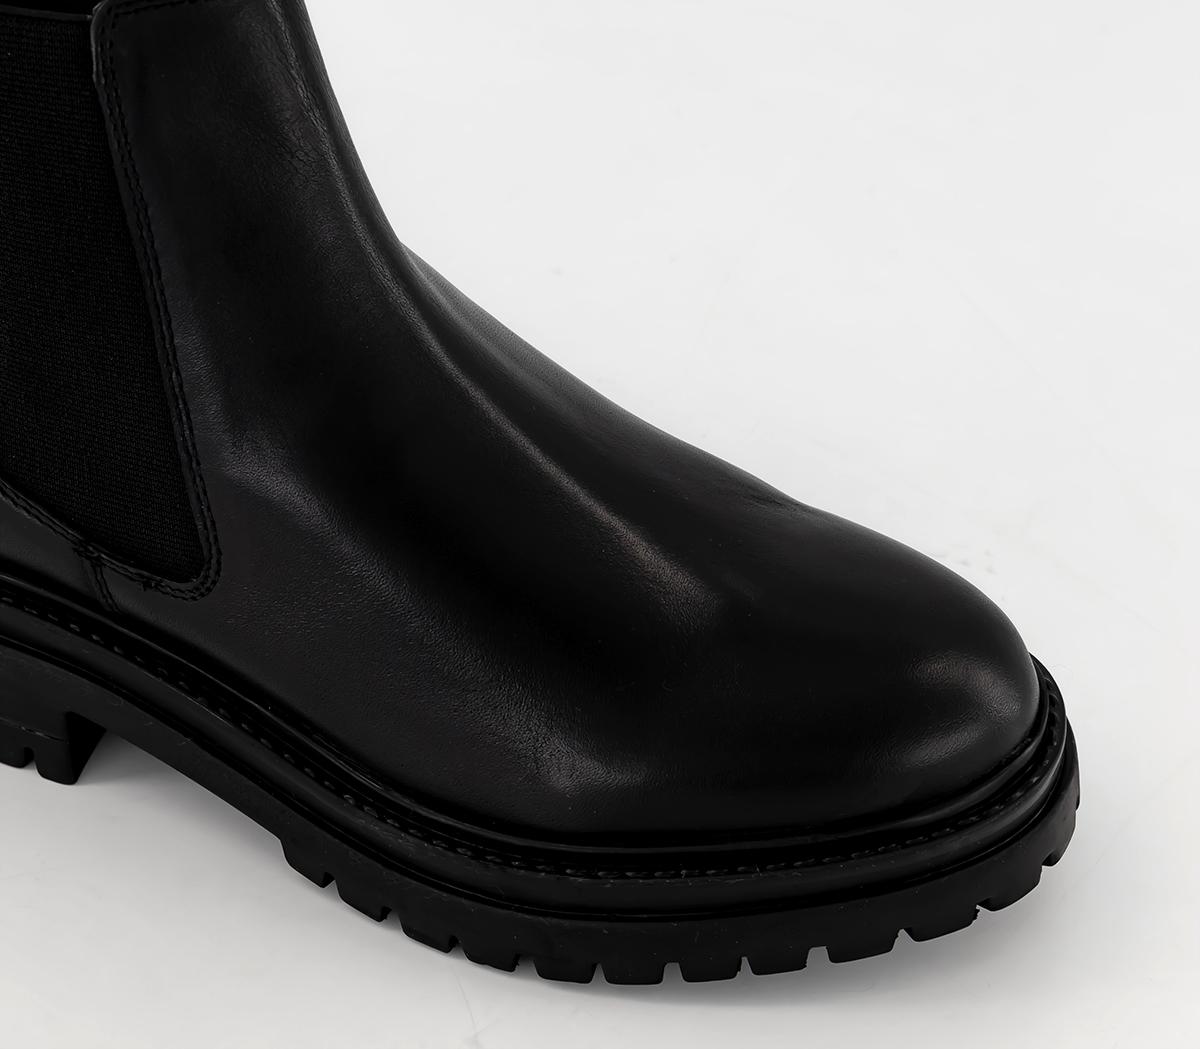 OFFICE Angie Cleat Sole Classic Chelsea Boots Black Leather - Women's ...